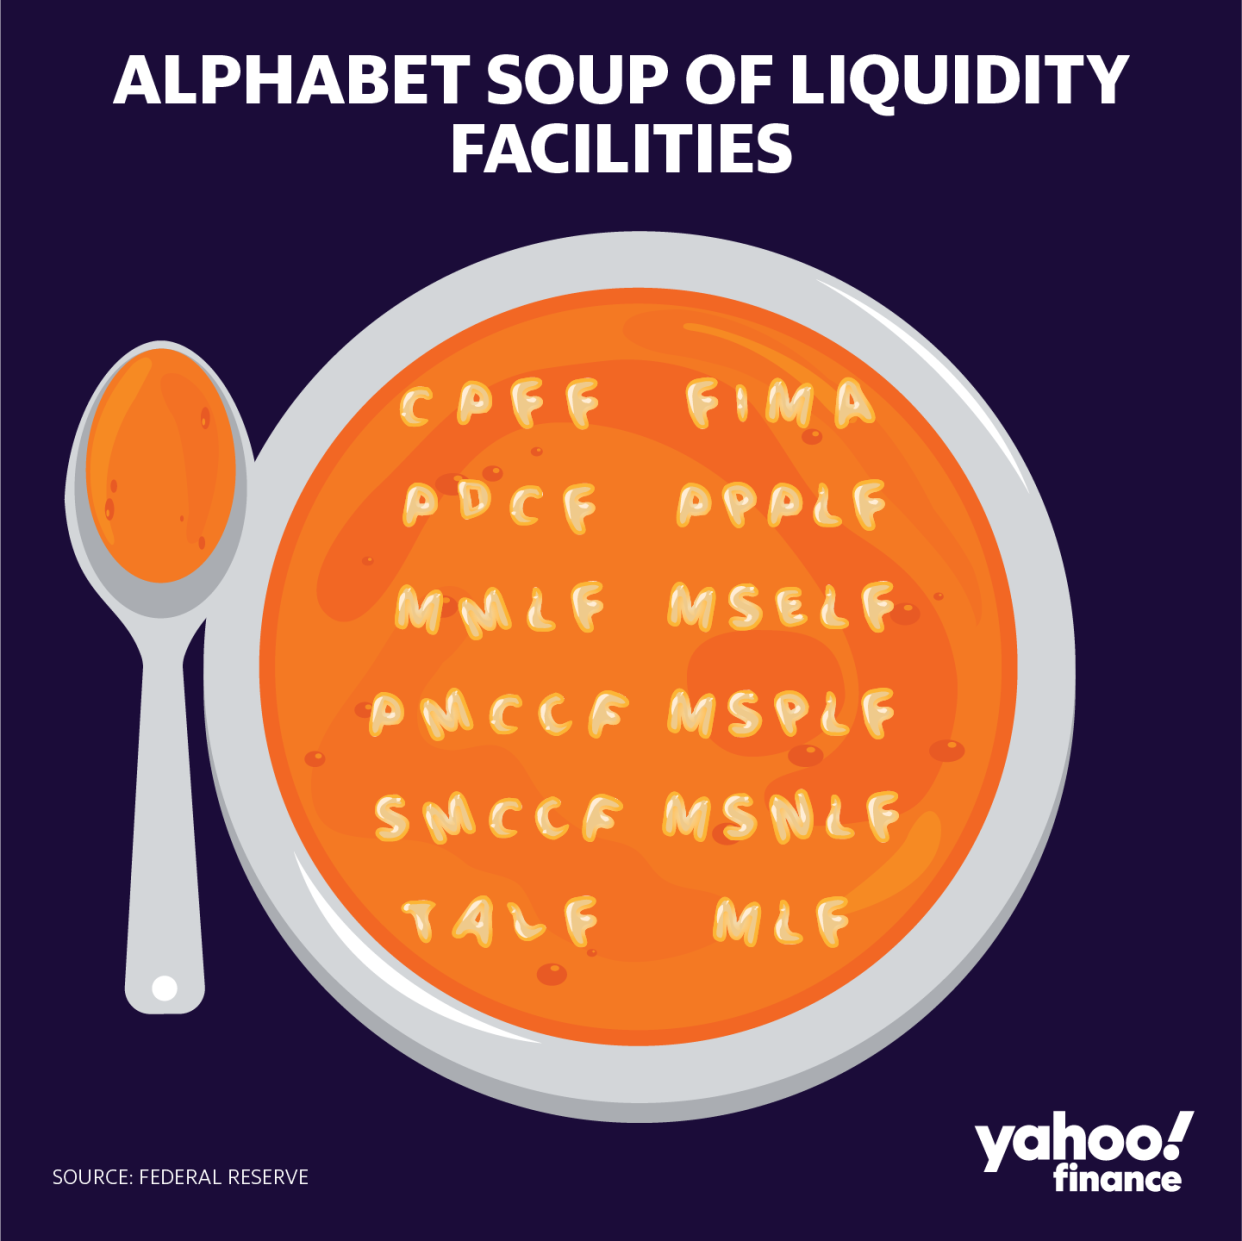 The Fed has unleashed a lot of acronyms. Credit: David Foster / Yahoo Finance